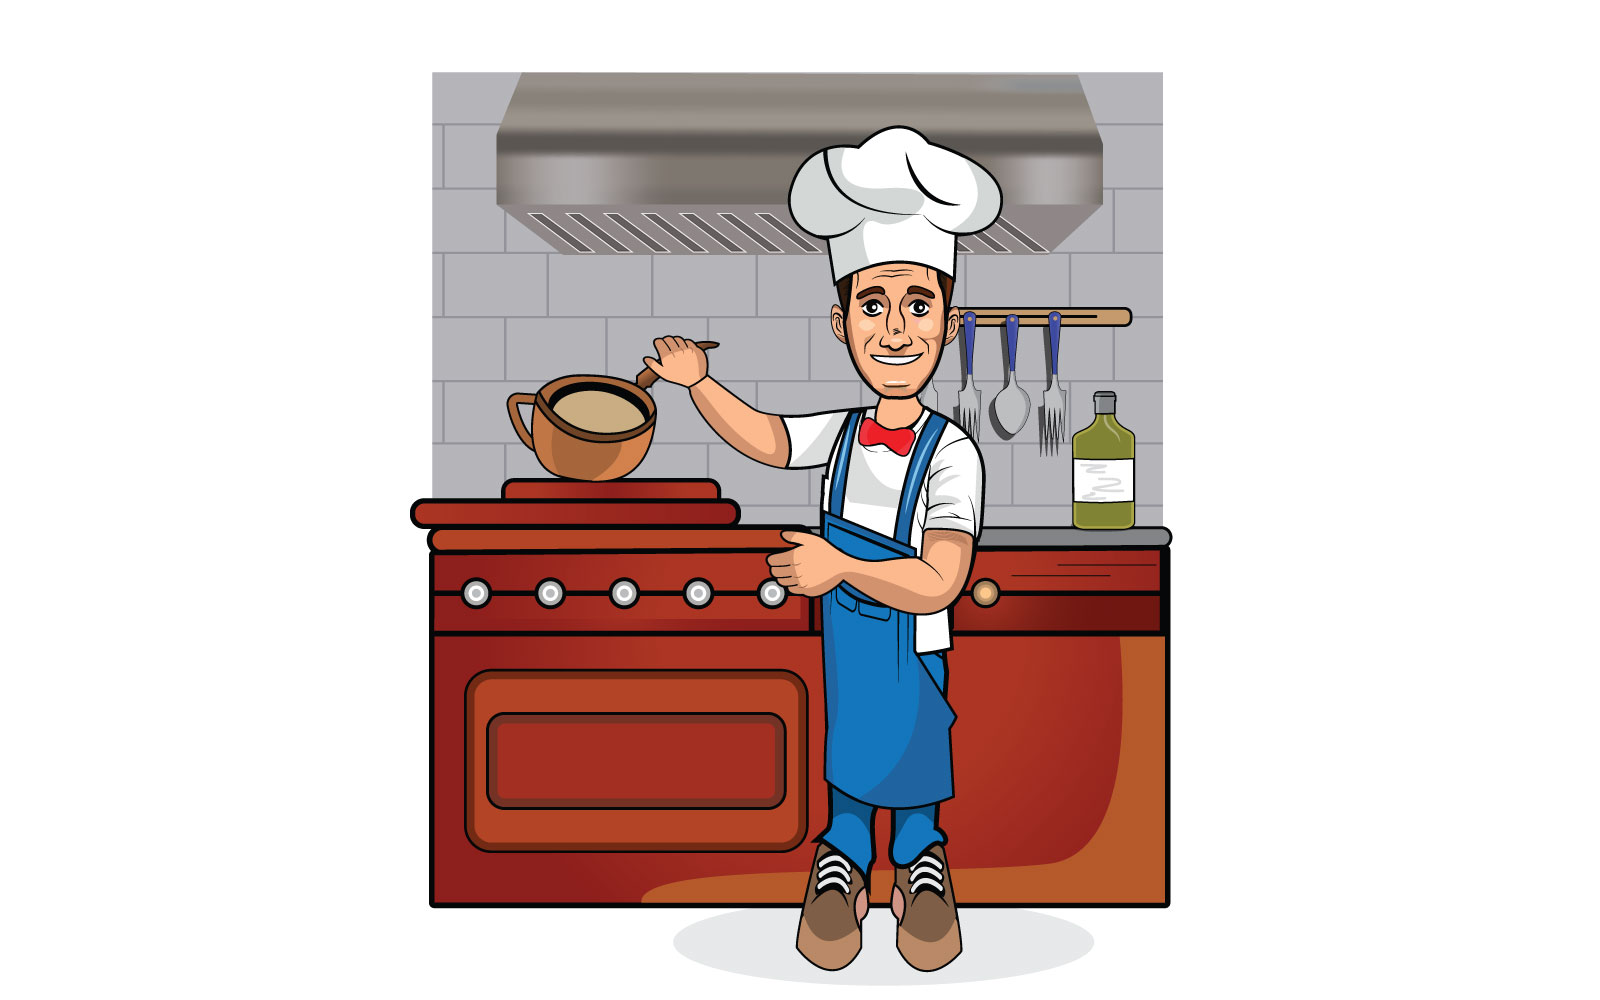 Man cooking in kitchen. Vector illustration.